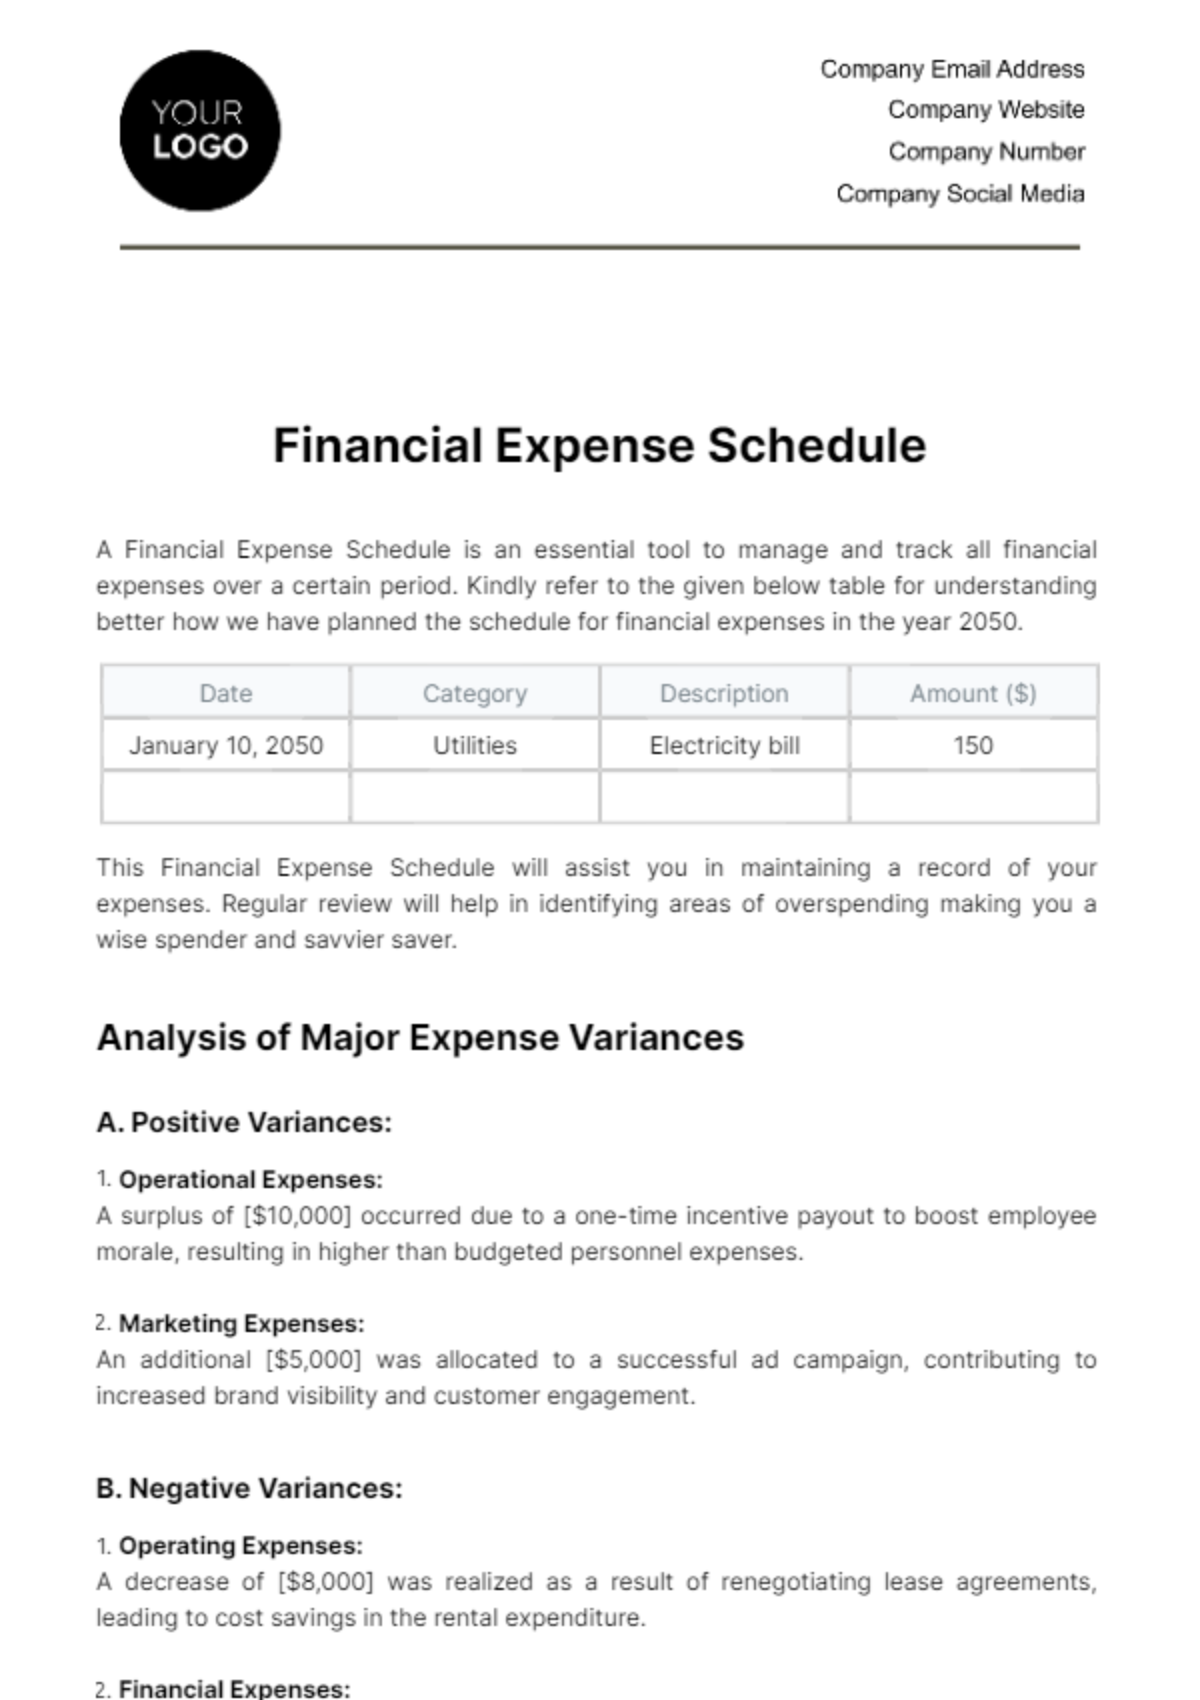 Financial Expense Schedule Template